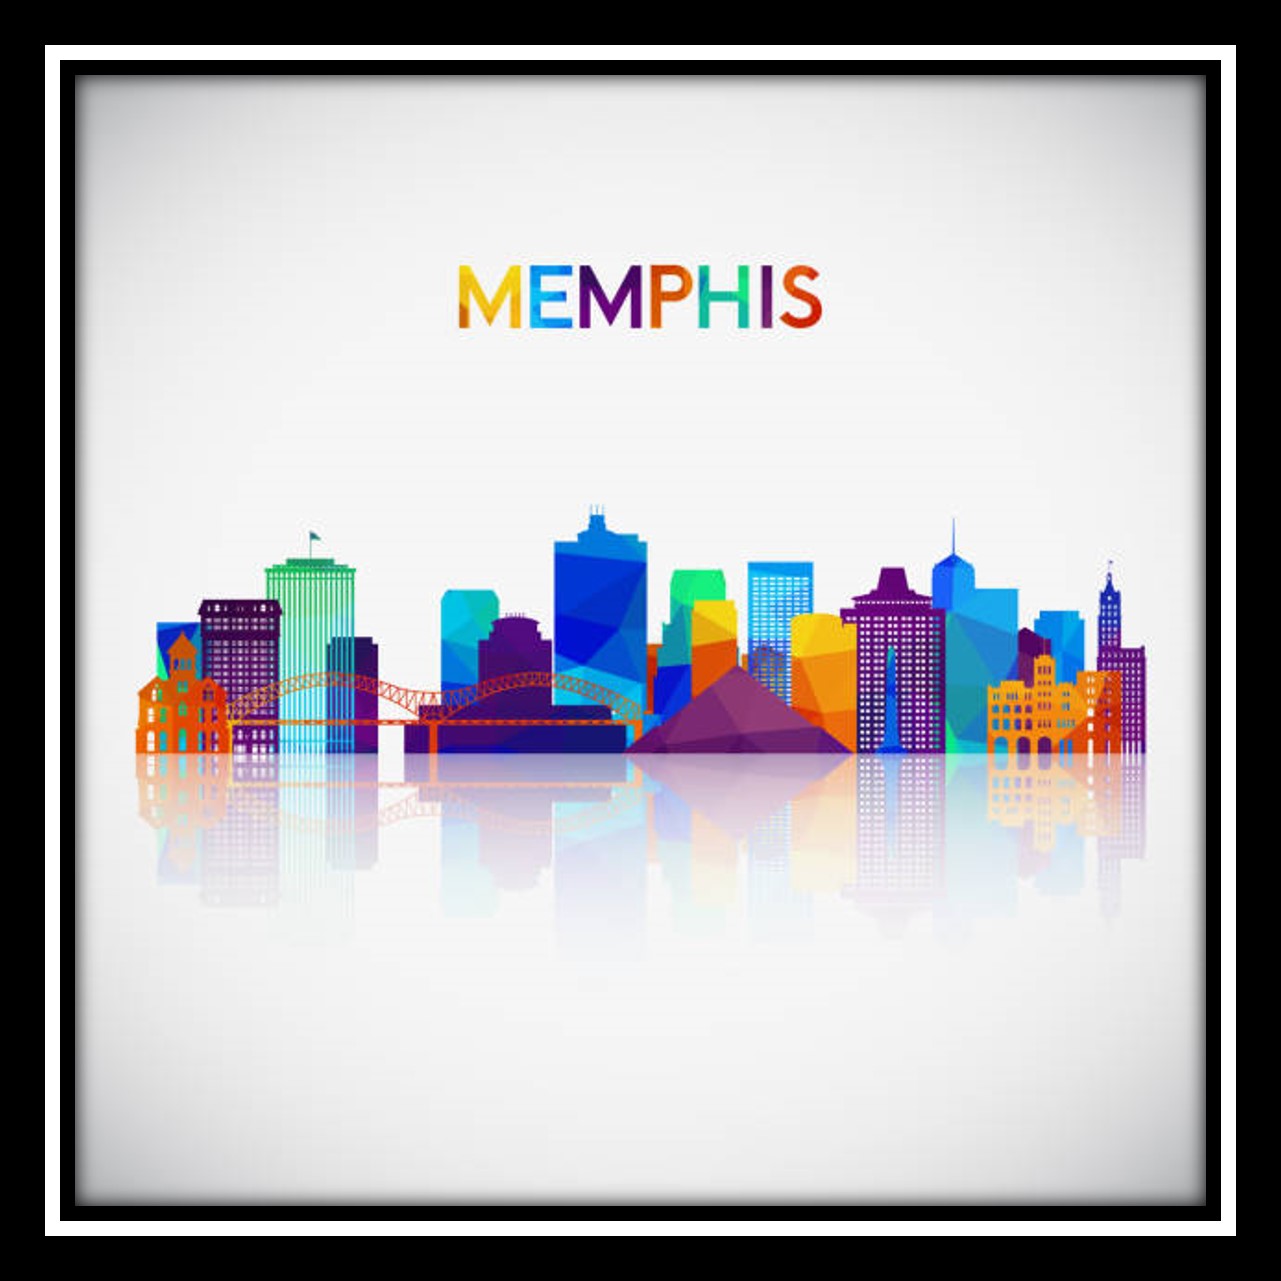 A drawing of the Memphis skyline with Memphis written above the skyline.